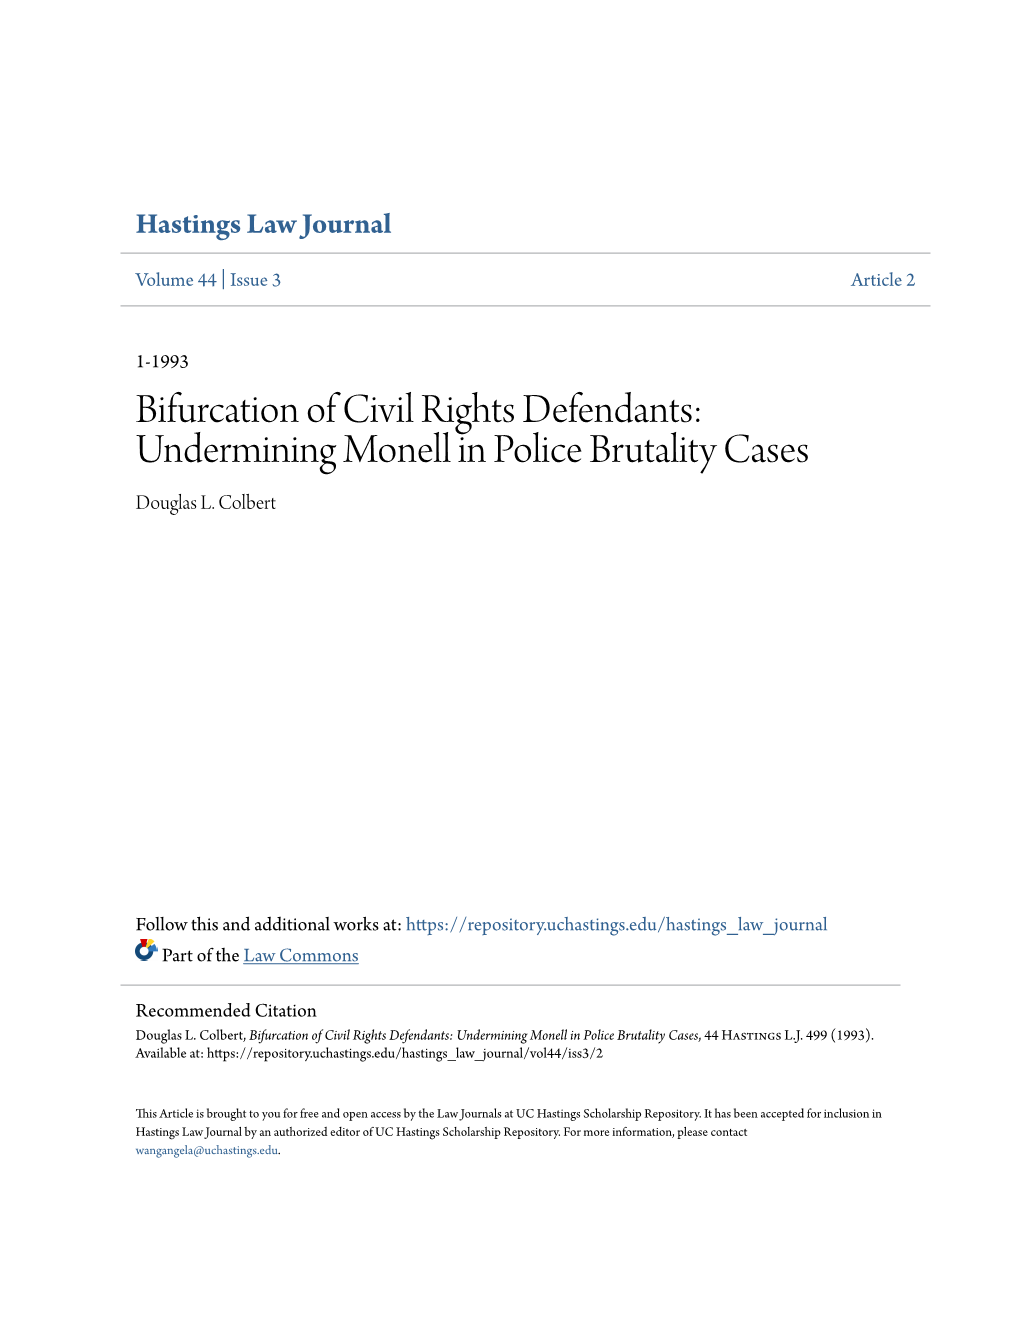 Bifurcation of Civil Rights Defendants: Undermining Monell in Police Brutality Cases Douglas L